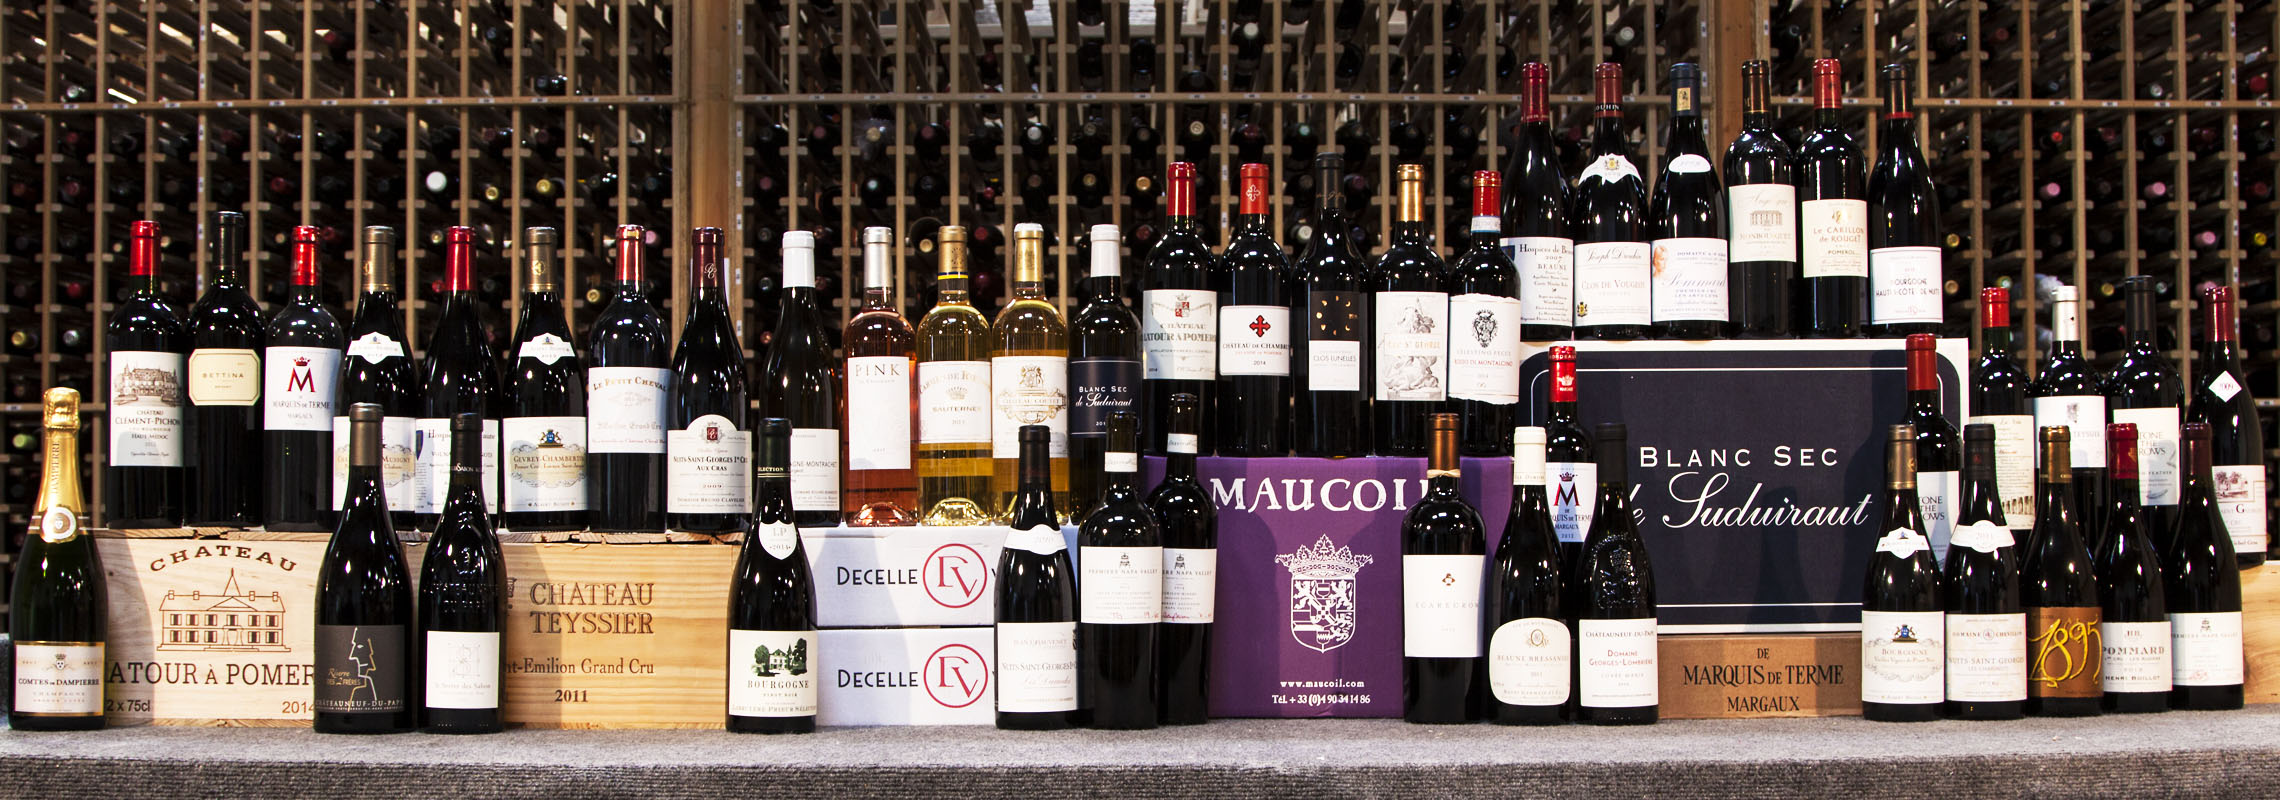 image - a well-stocked wine collection - How to Sell Your Wine